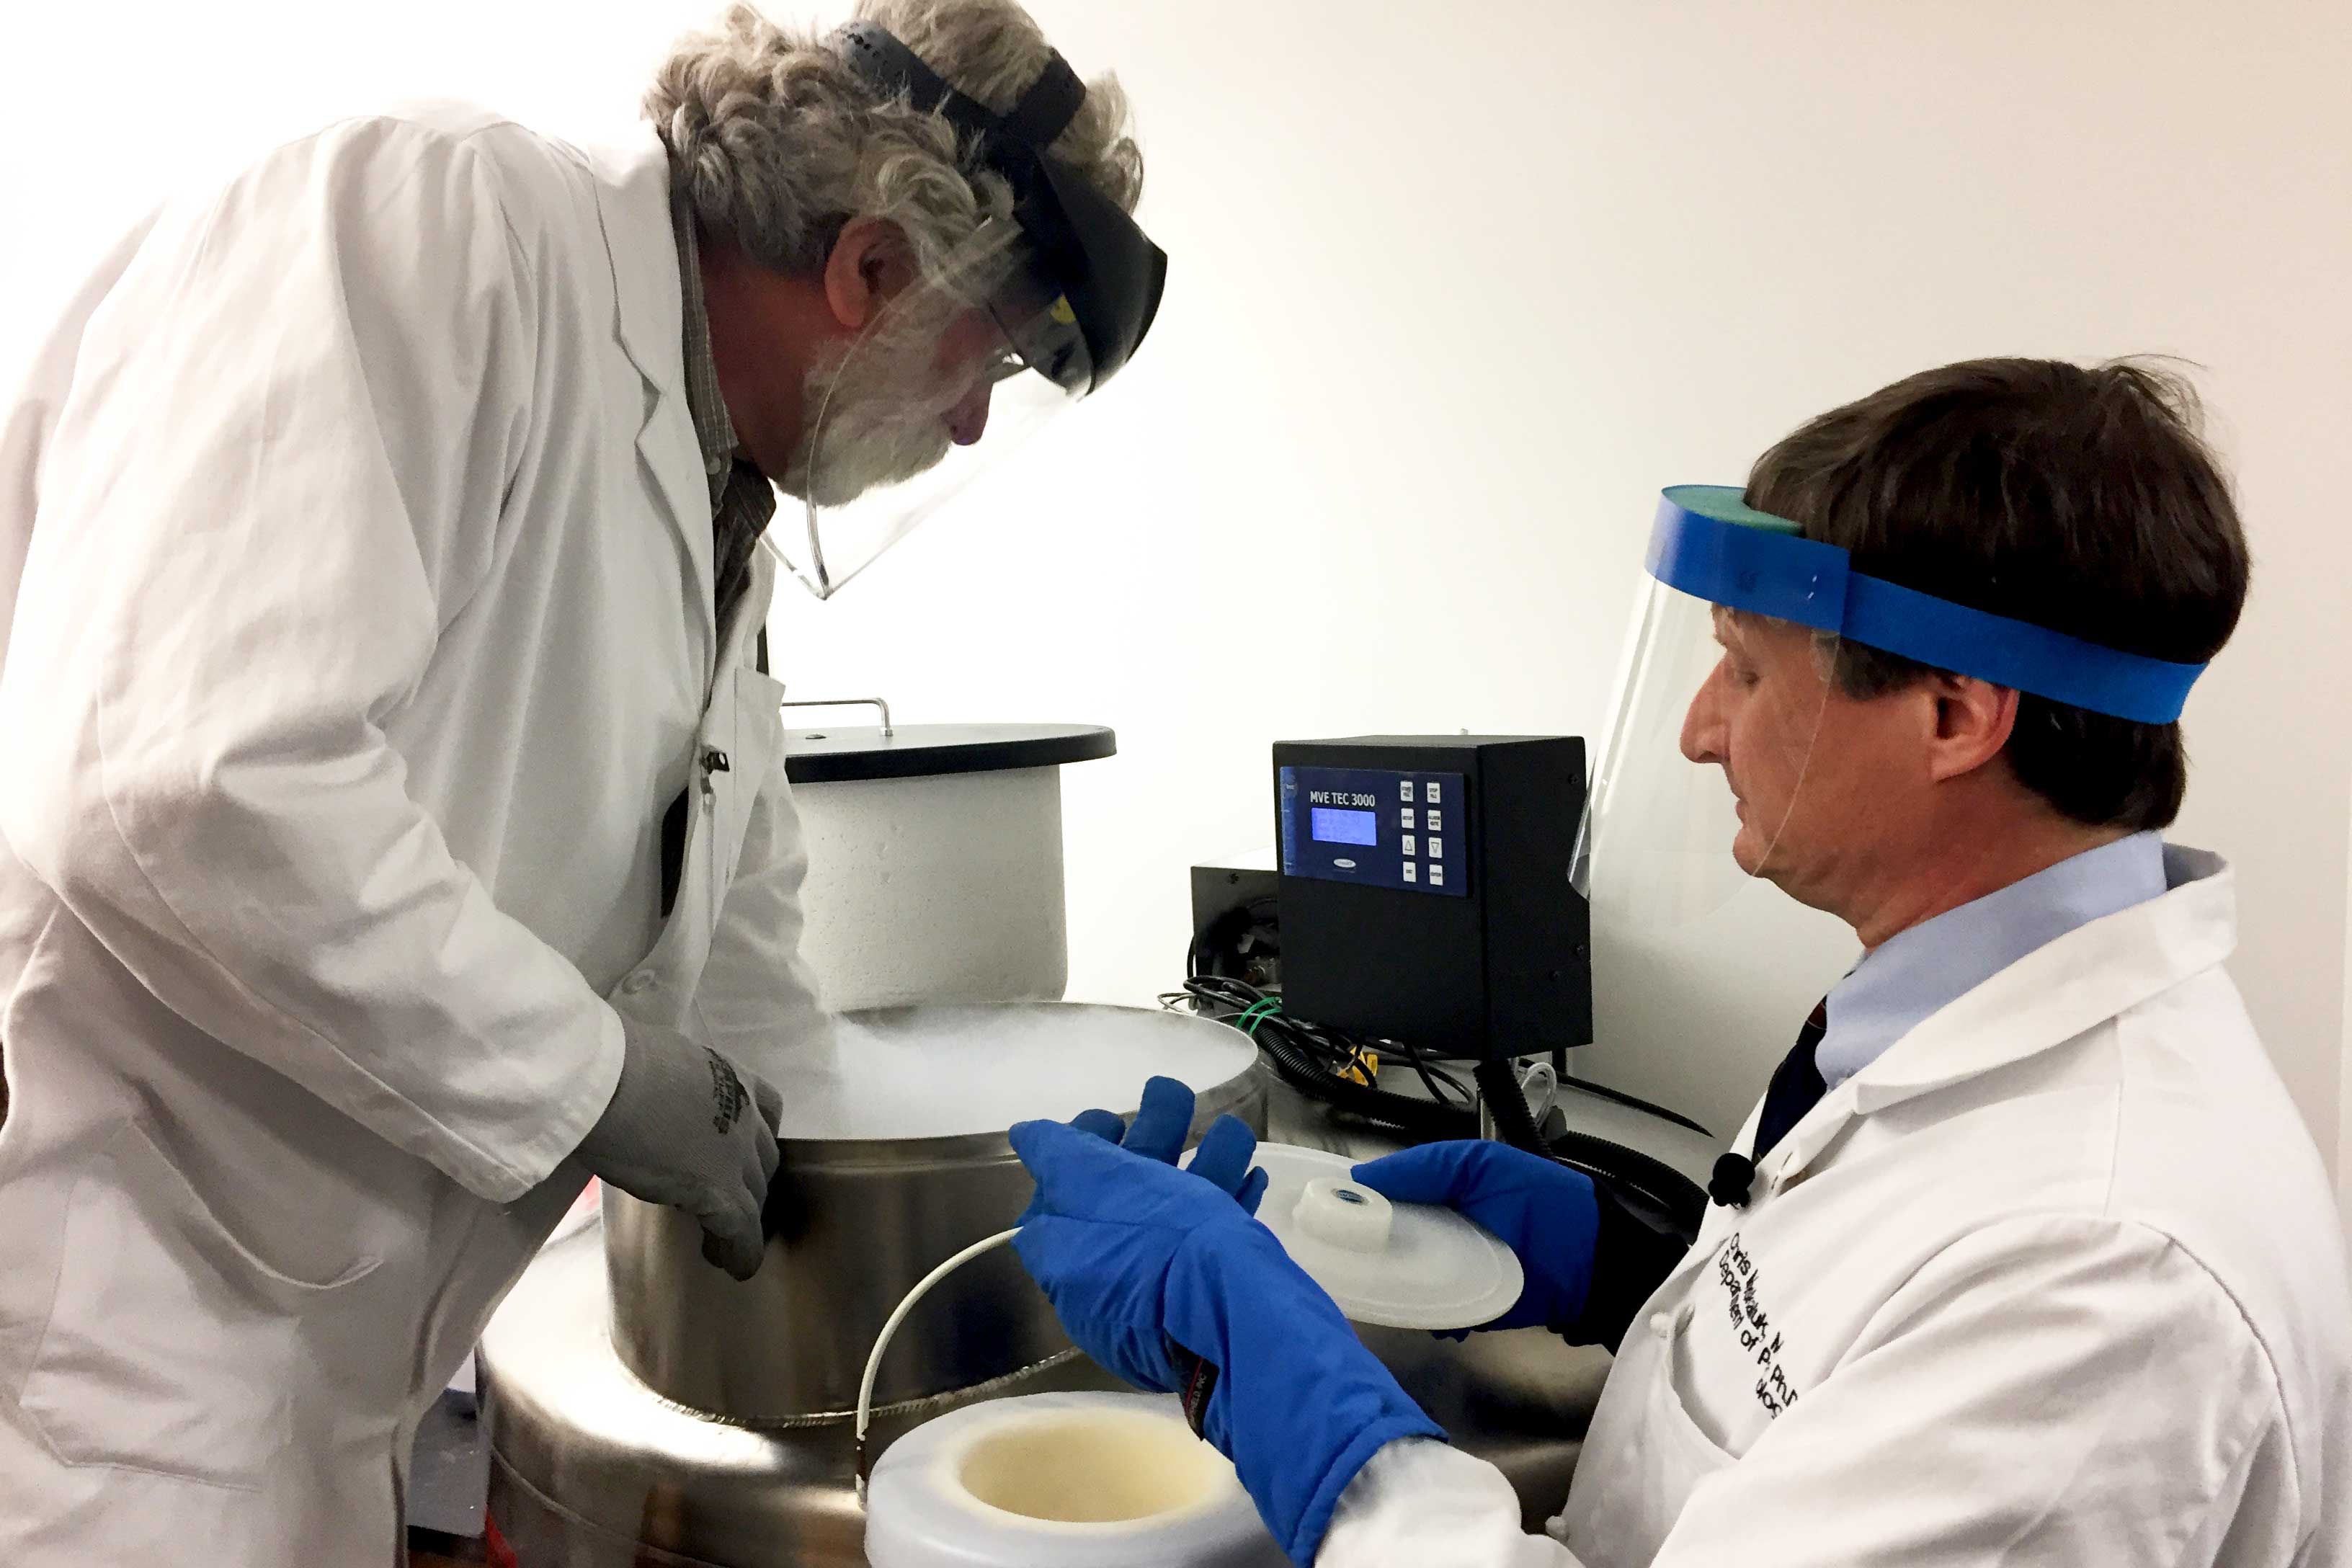 Dr. Christopher Moskaluk, right, works with another person in a lab